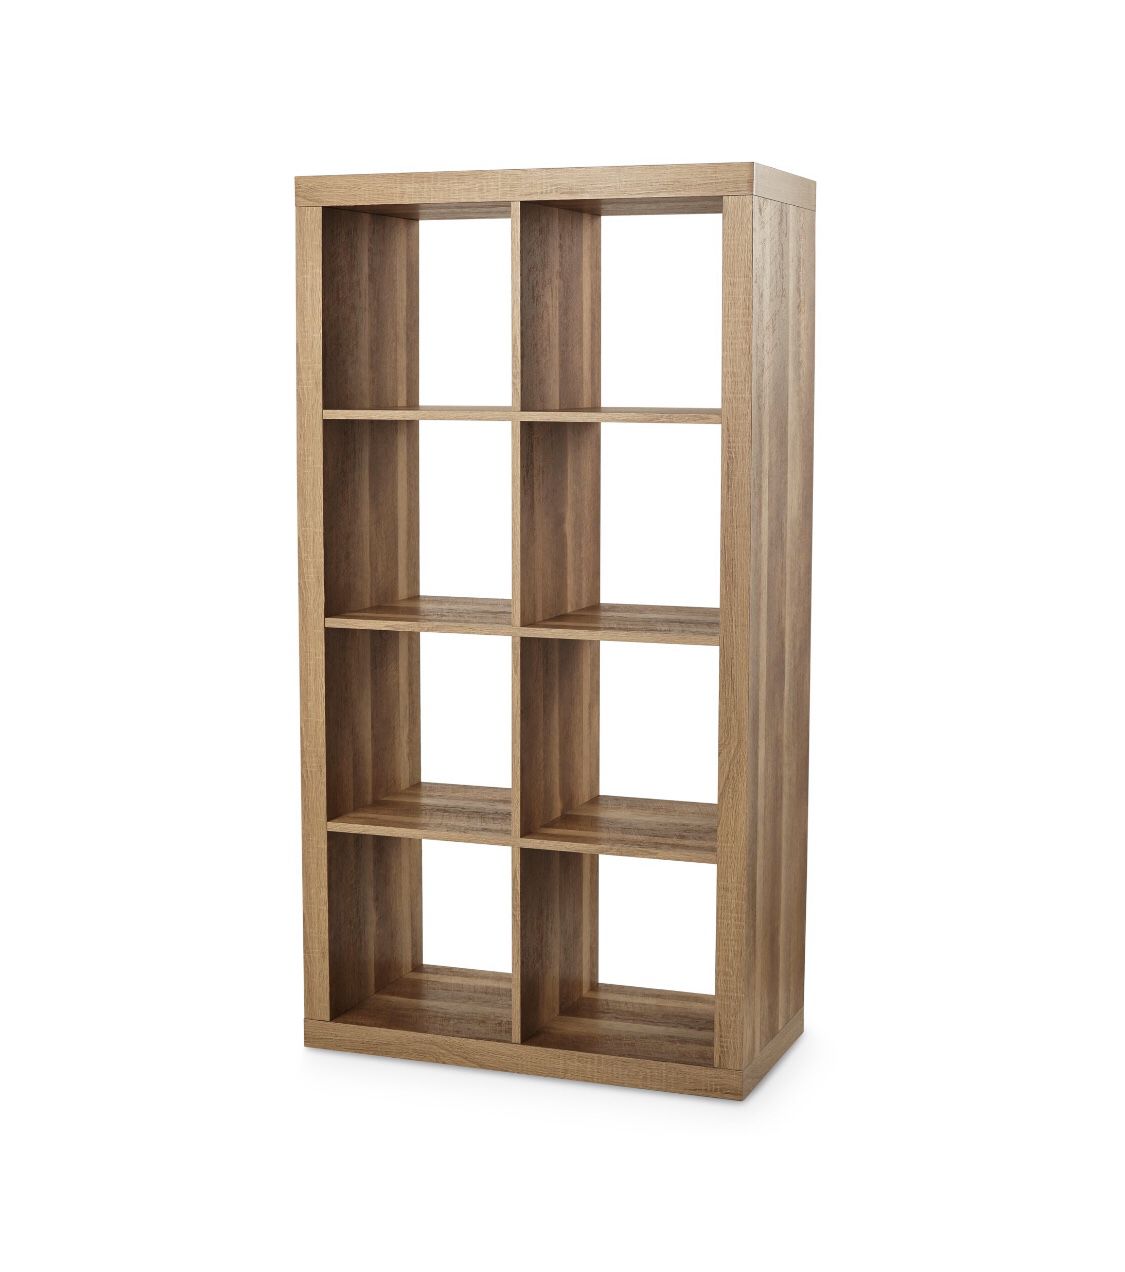 Better Homes & Gardens 8-Cube Organizer, Weathered